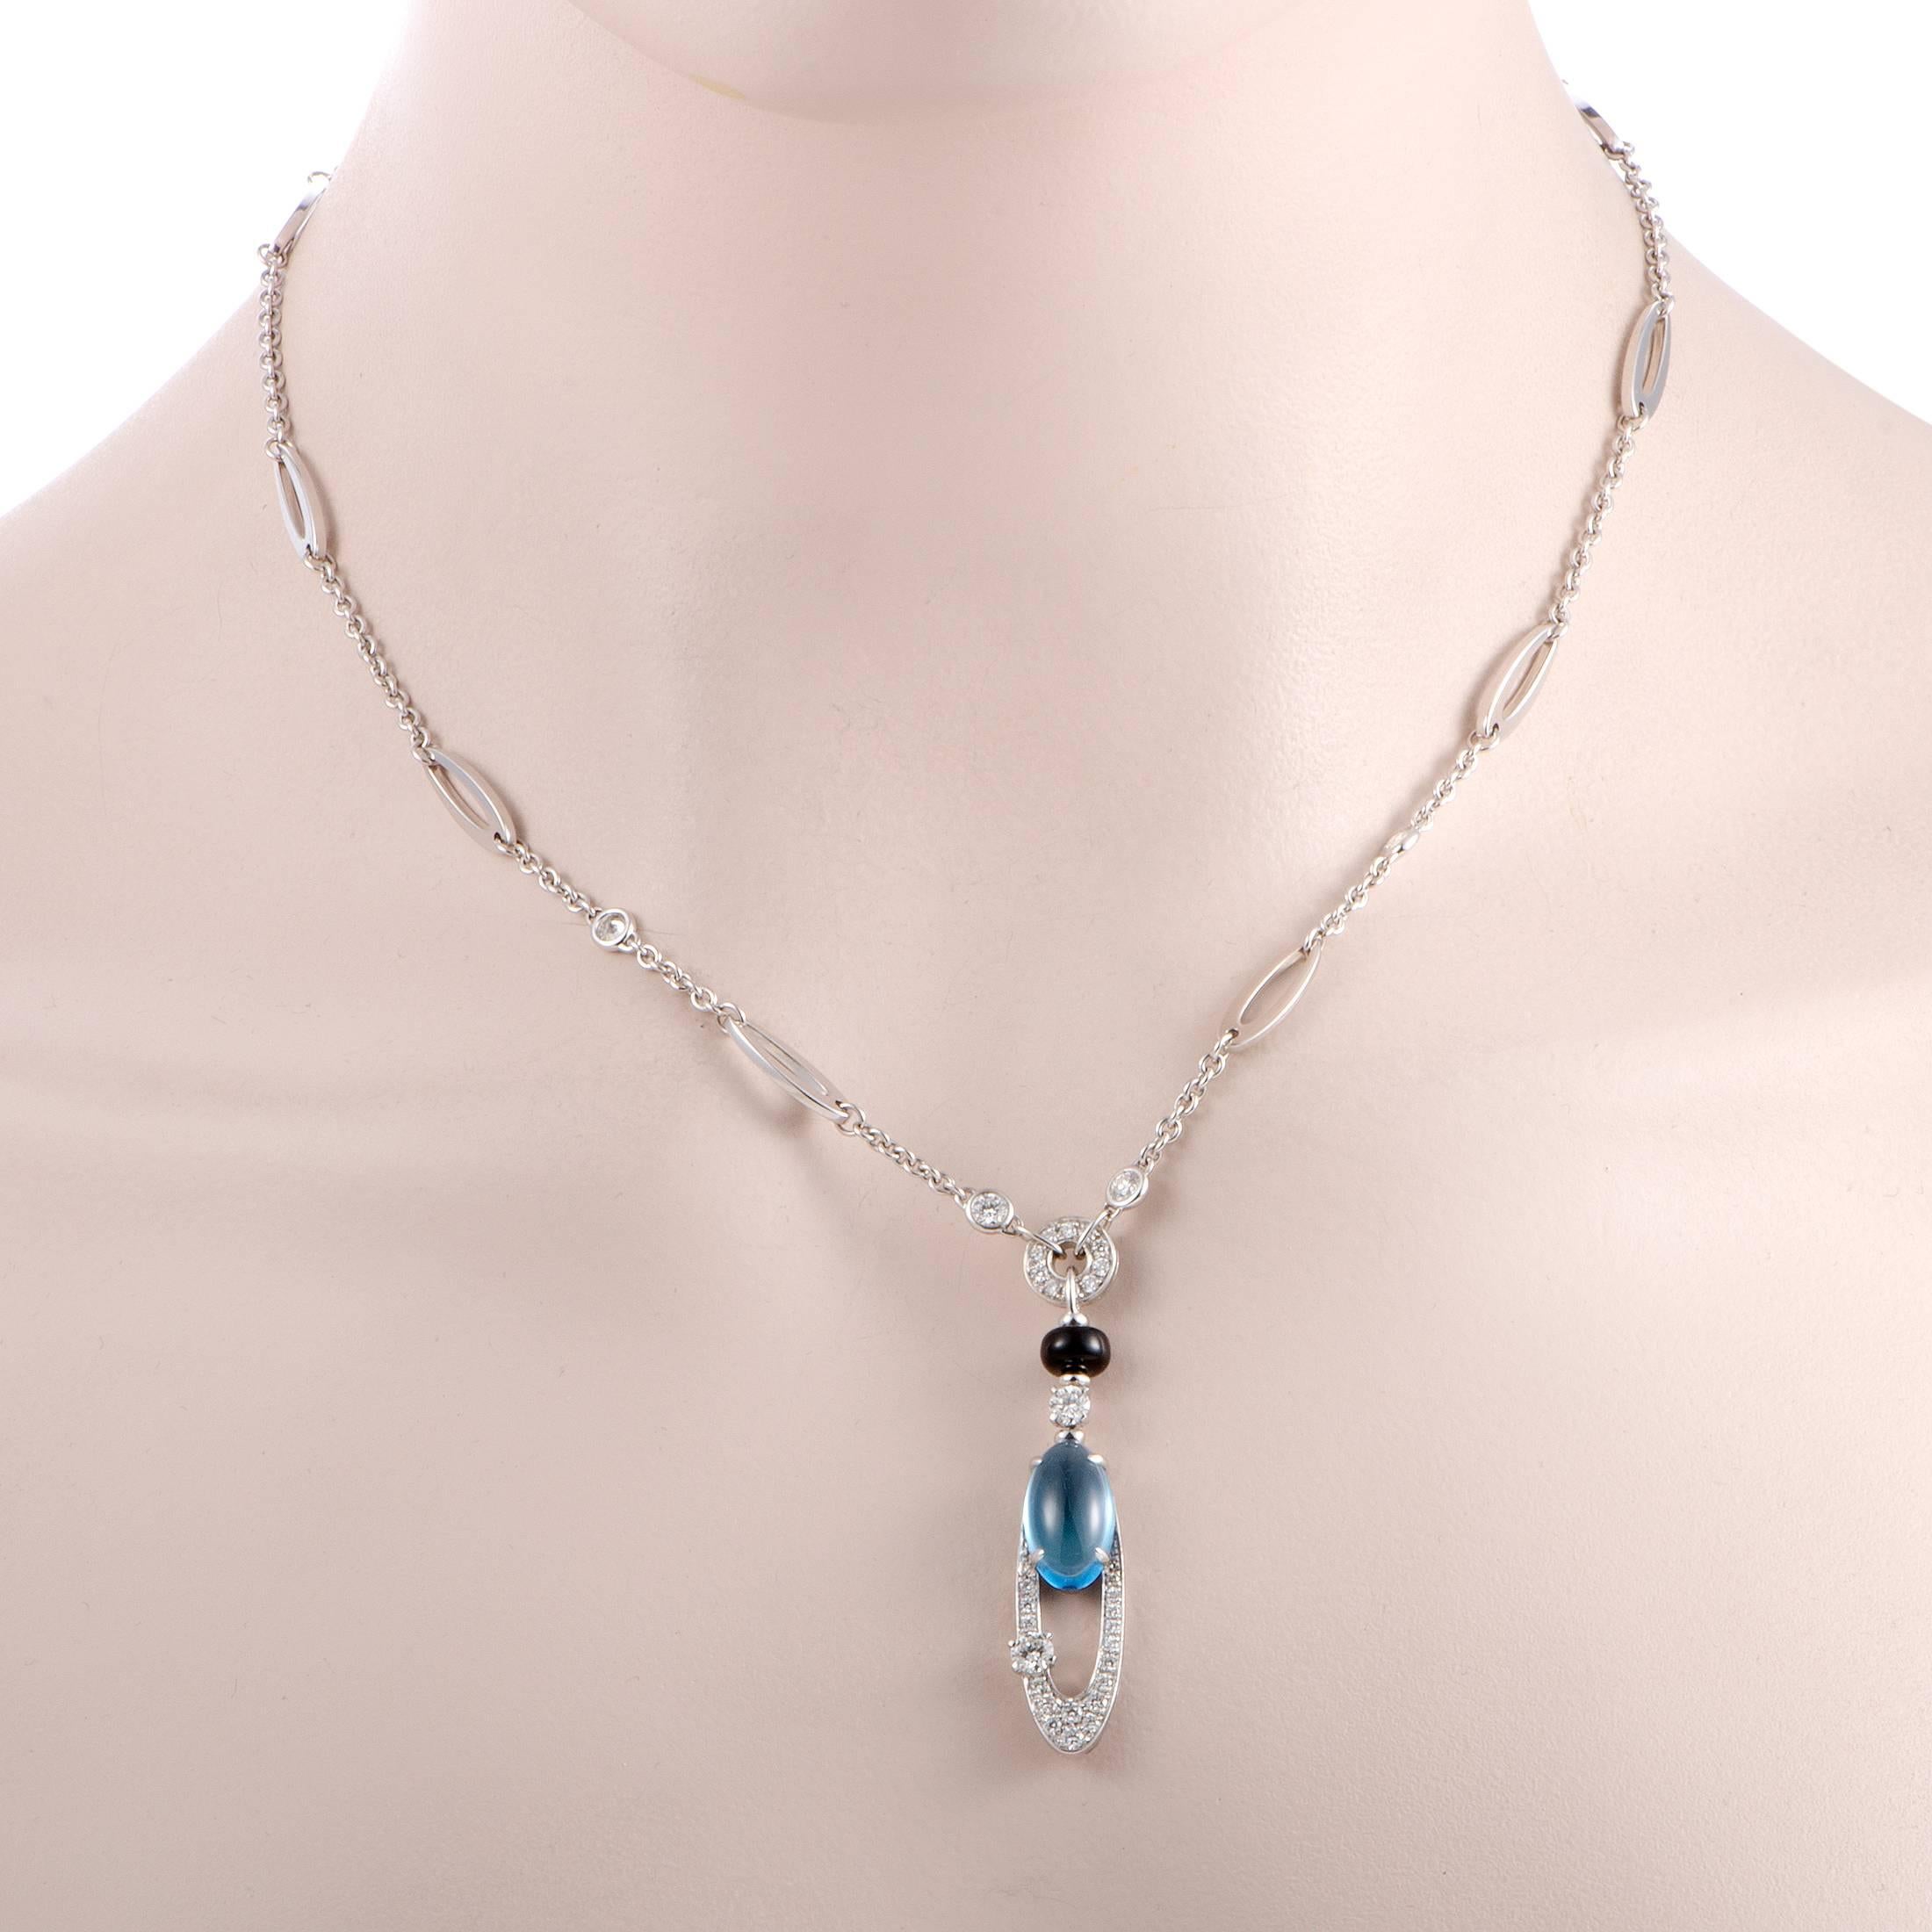 This utterly exquisite necklace from Bulgari's Elisia collection is one-of-a-kind! Not only does this 18K white gold necklace have sparkling diamonds on its pendant, but it also has a gorgeous topaz cabochon and a stunning onyx bead that fit